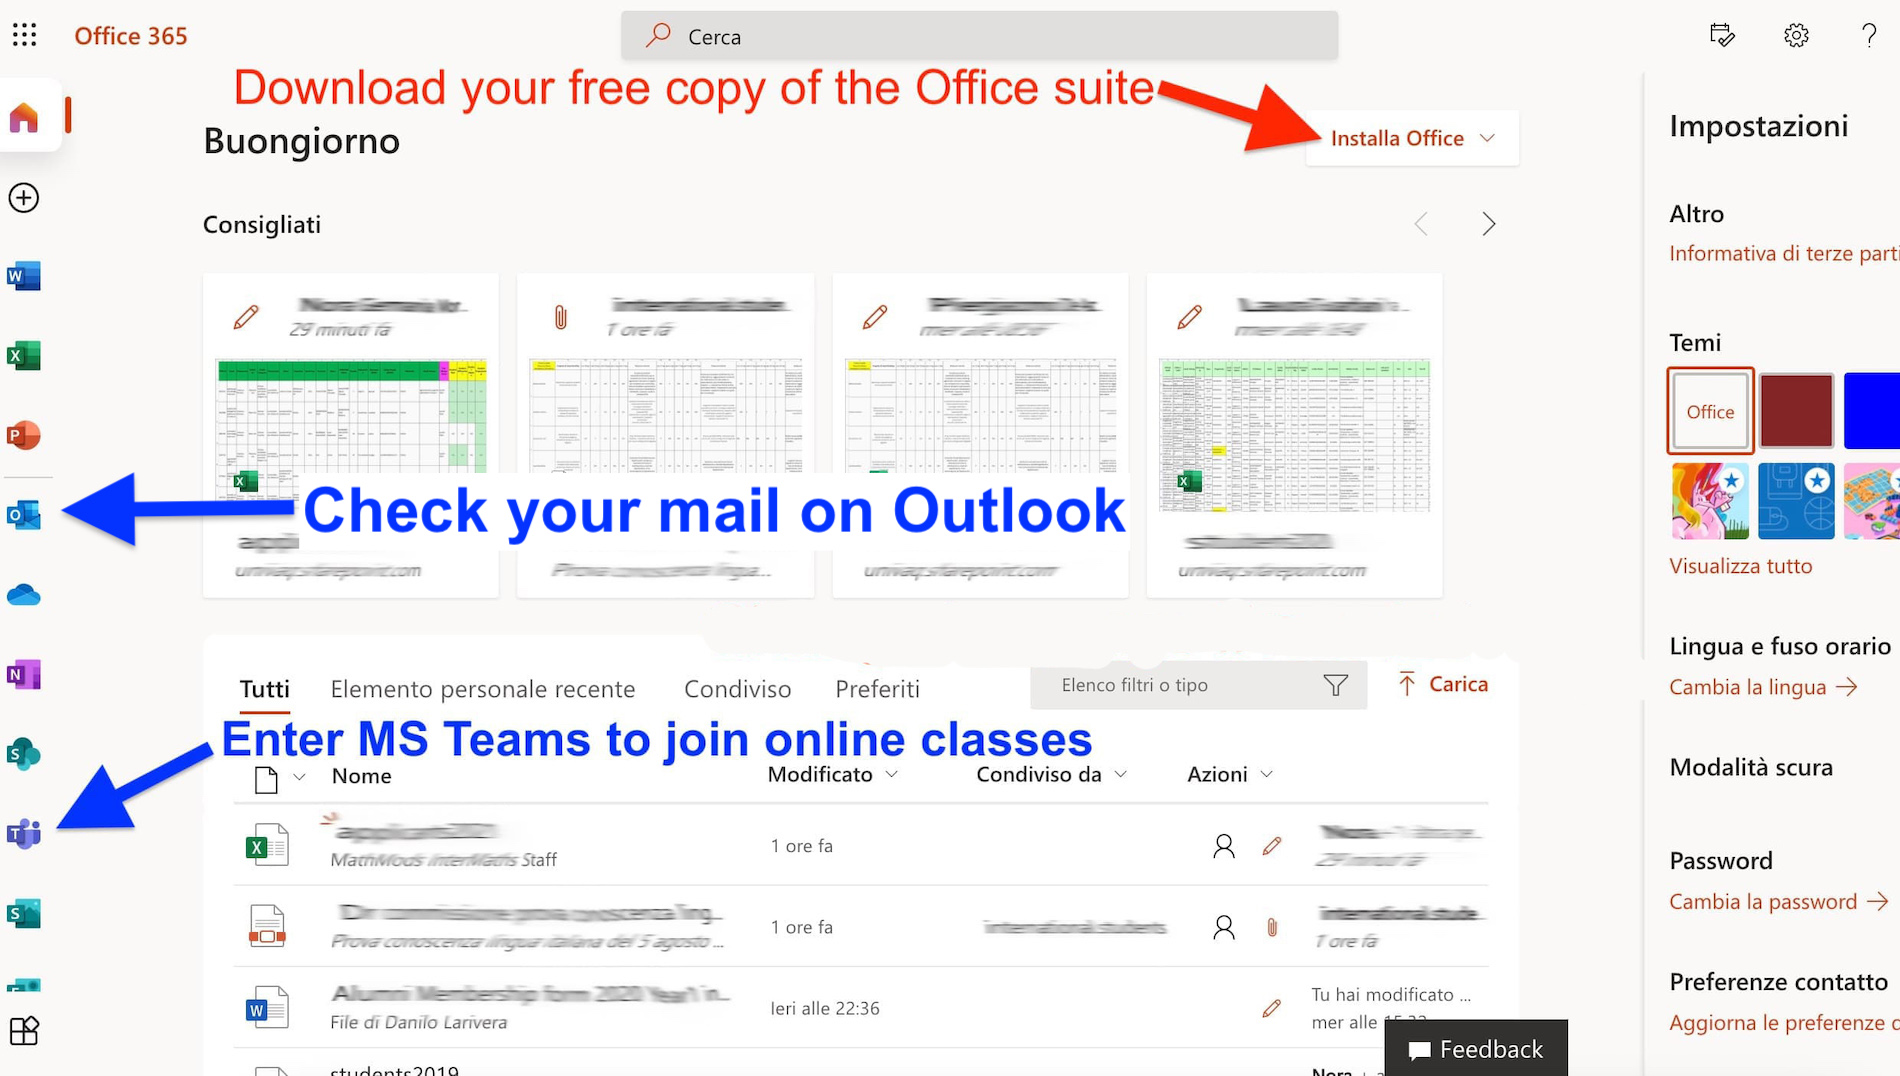 7 - Office365 Home Page